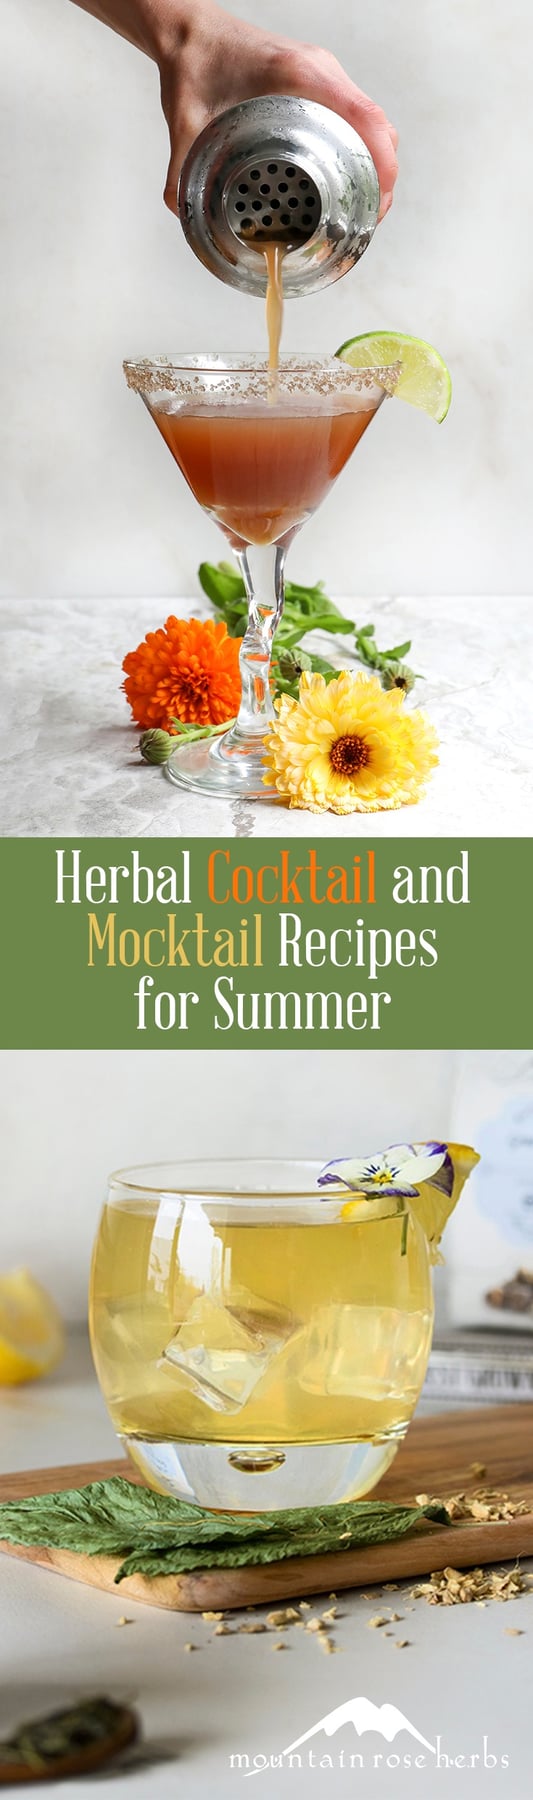 Herbal Cocktail and Mocktail Recipes for Summer